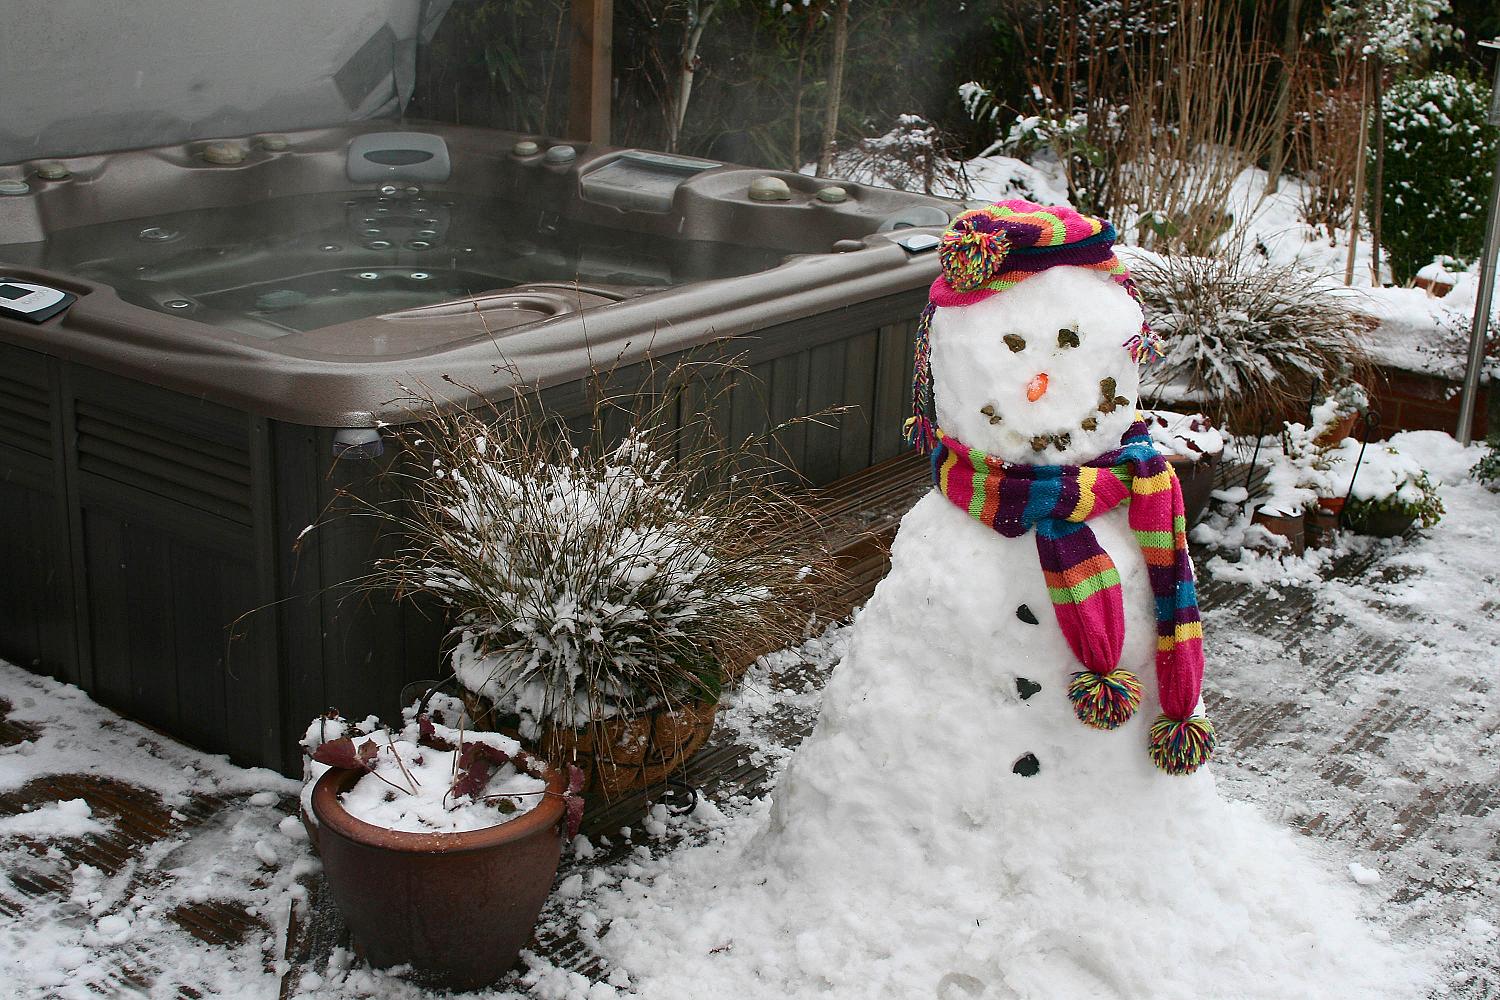 Hot tub spa outside with a snowman next to it